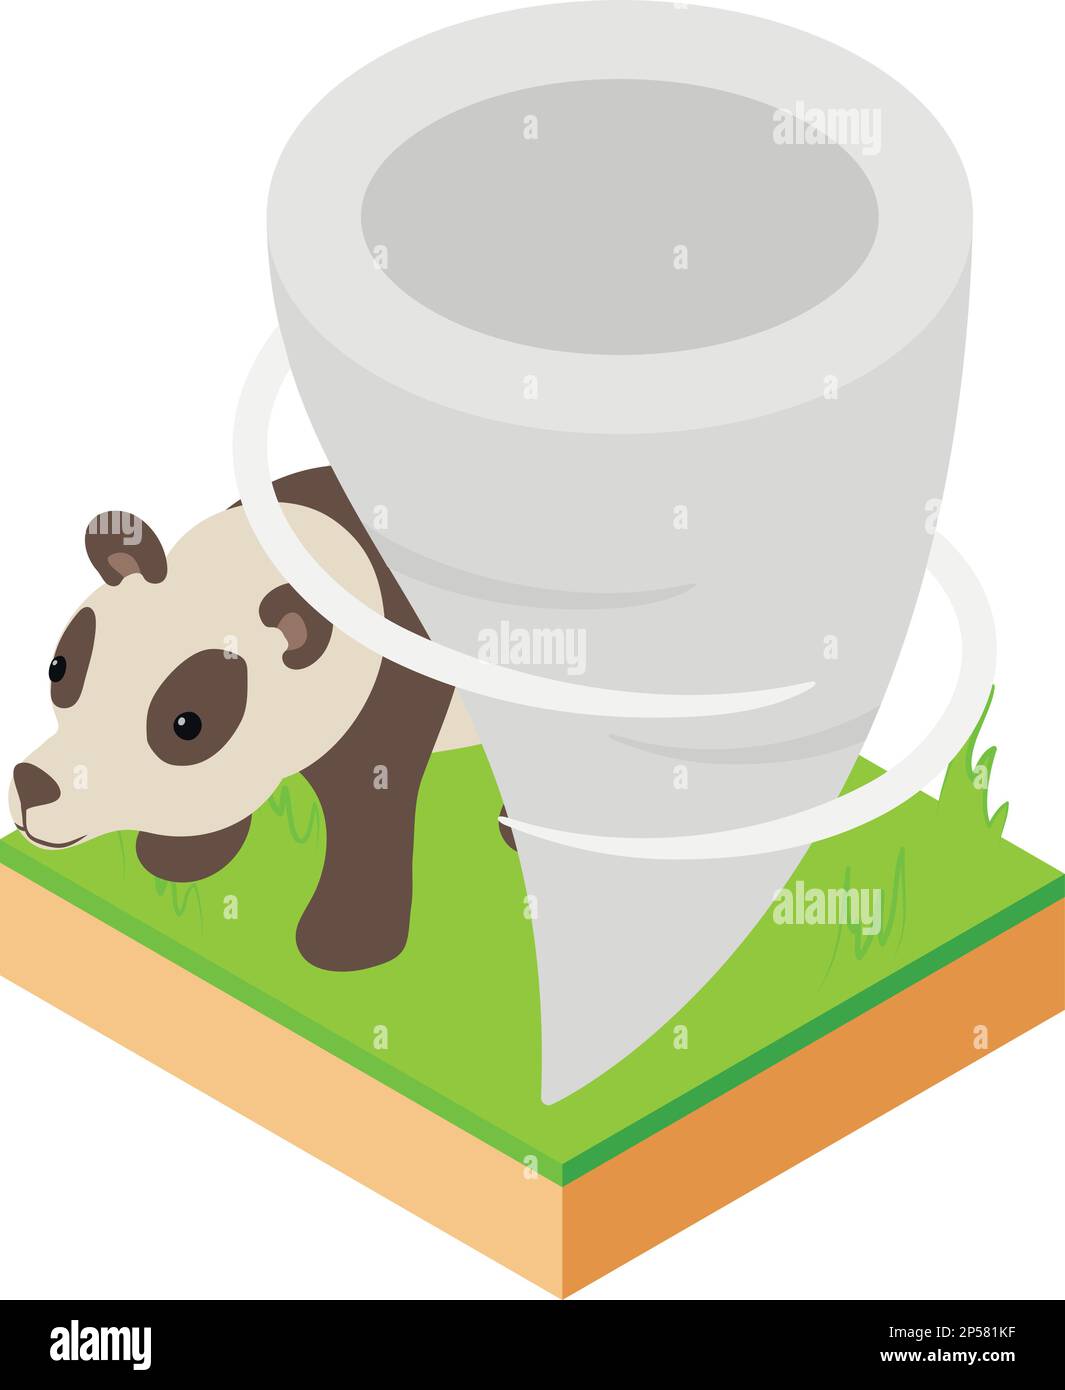 Tornado icon isometric vector. Strong whirlwind on piece of land with panda icon. Hurricane, cyclone, typhoon, extreme weather Stock Vector